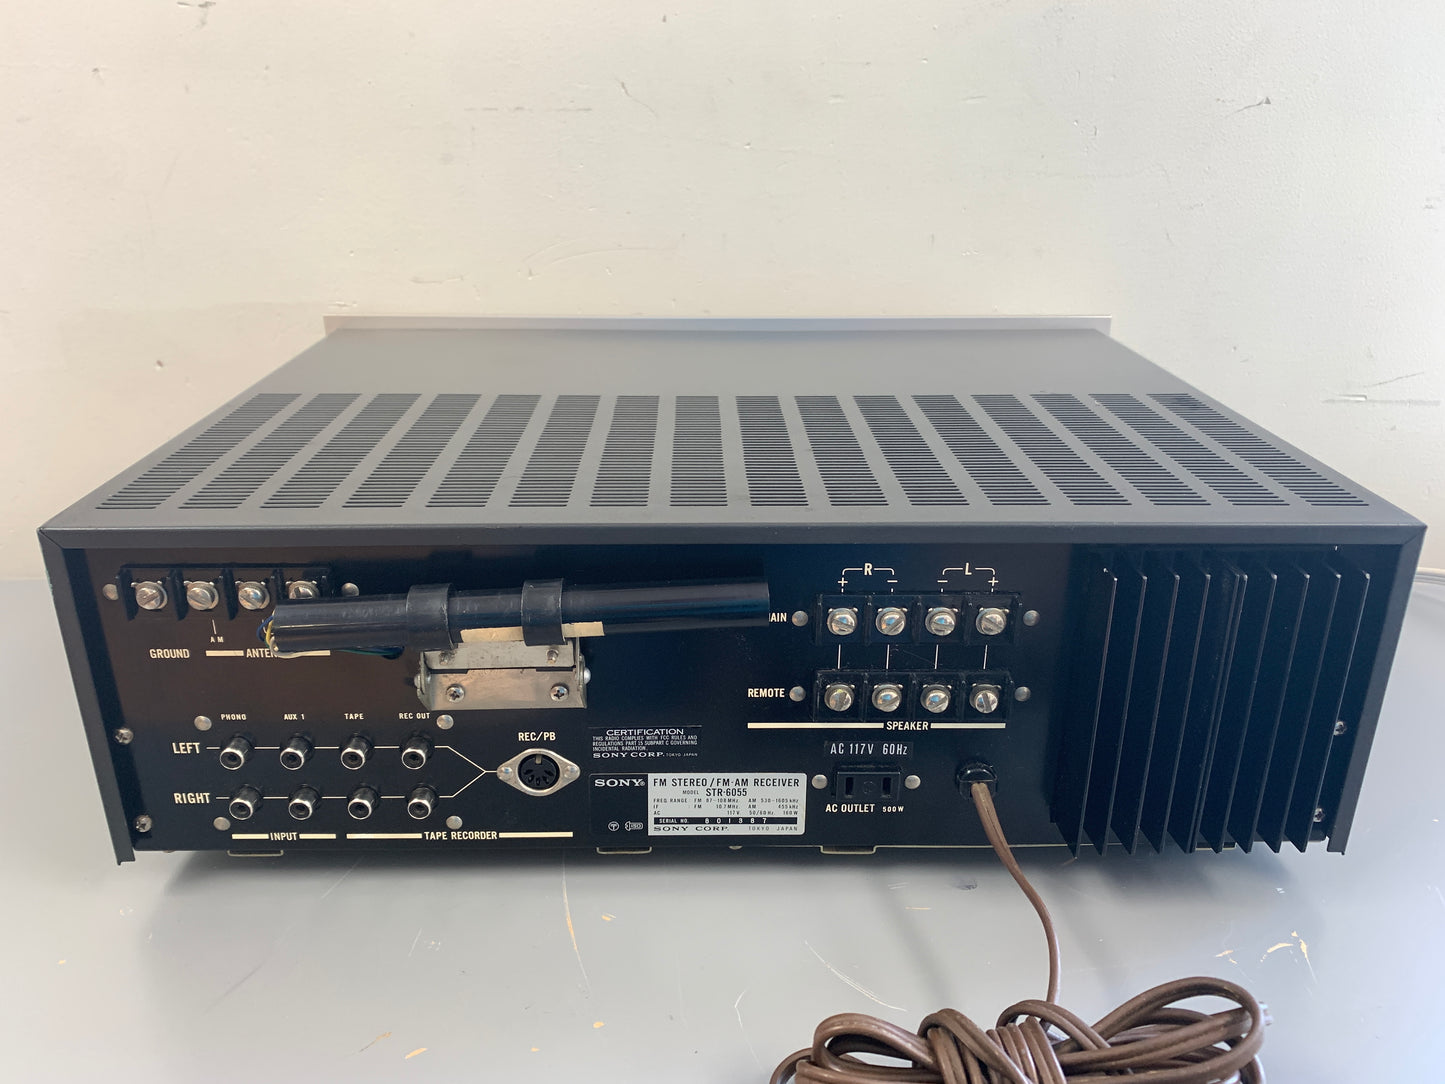 Sony STR-6055 Stereo Receiver * 1971 * 40W RMS * LED Upgrade * $100 Flat Ship CONUS Only